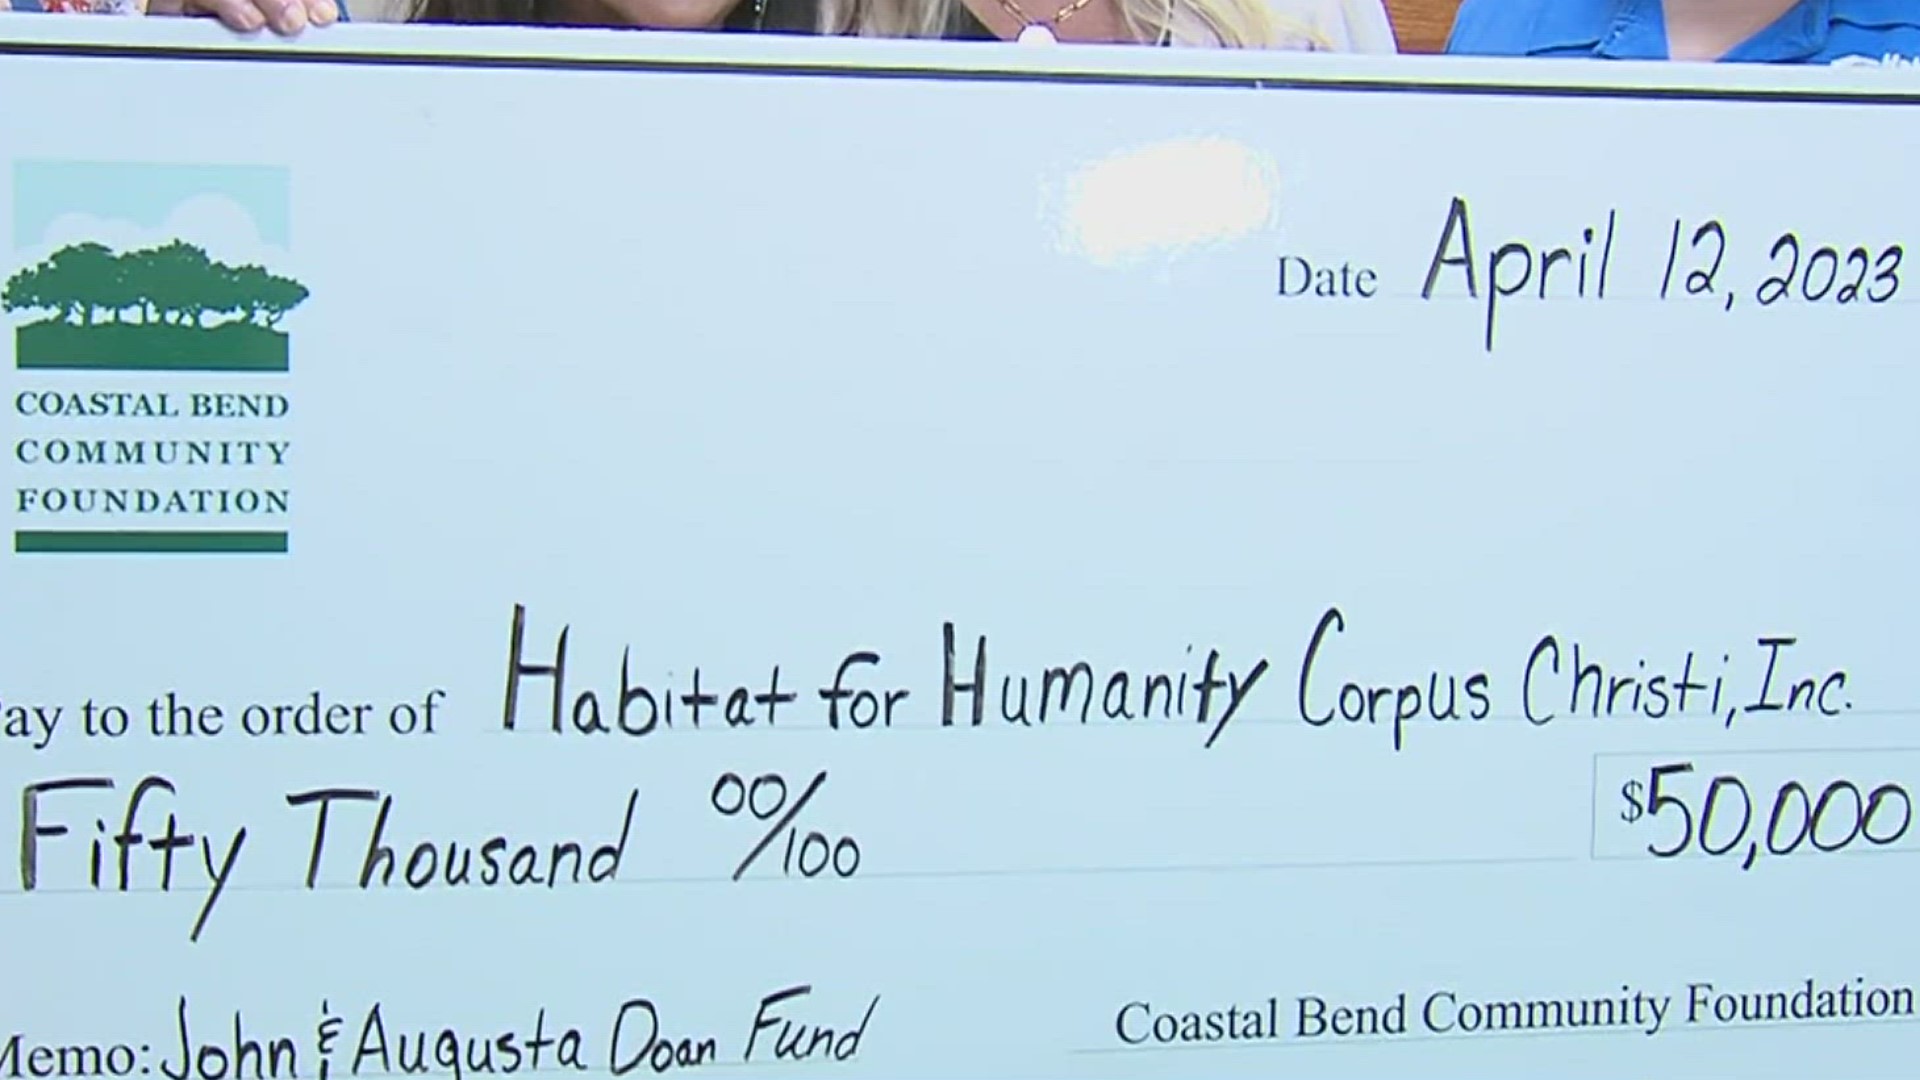 3NEWS spoke with organization leaders who said the Coastal Bend Community Foundation's support is a blessing to them and everyone that they serve.